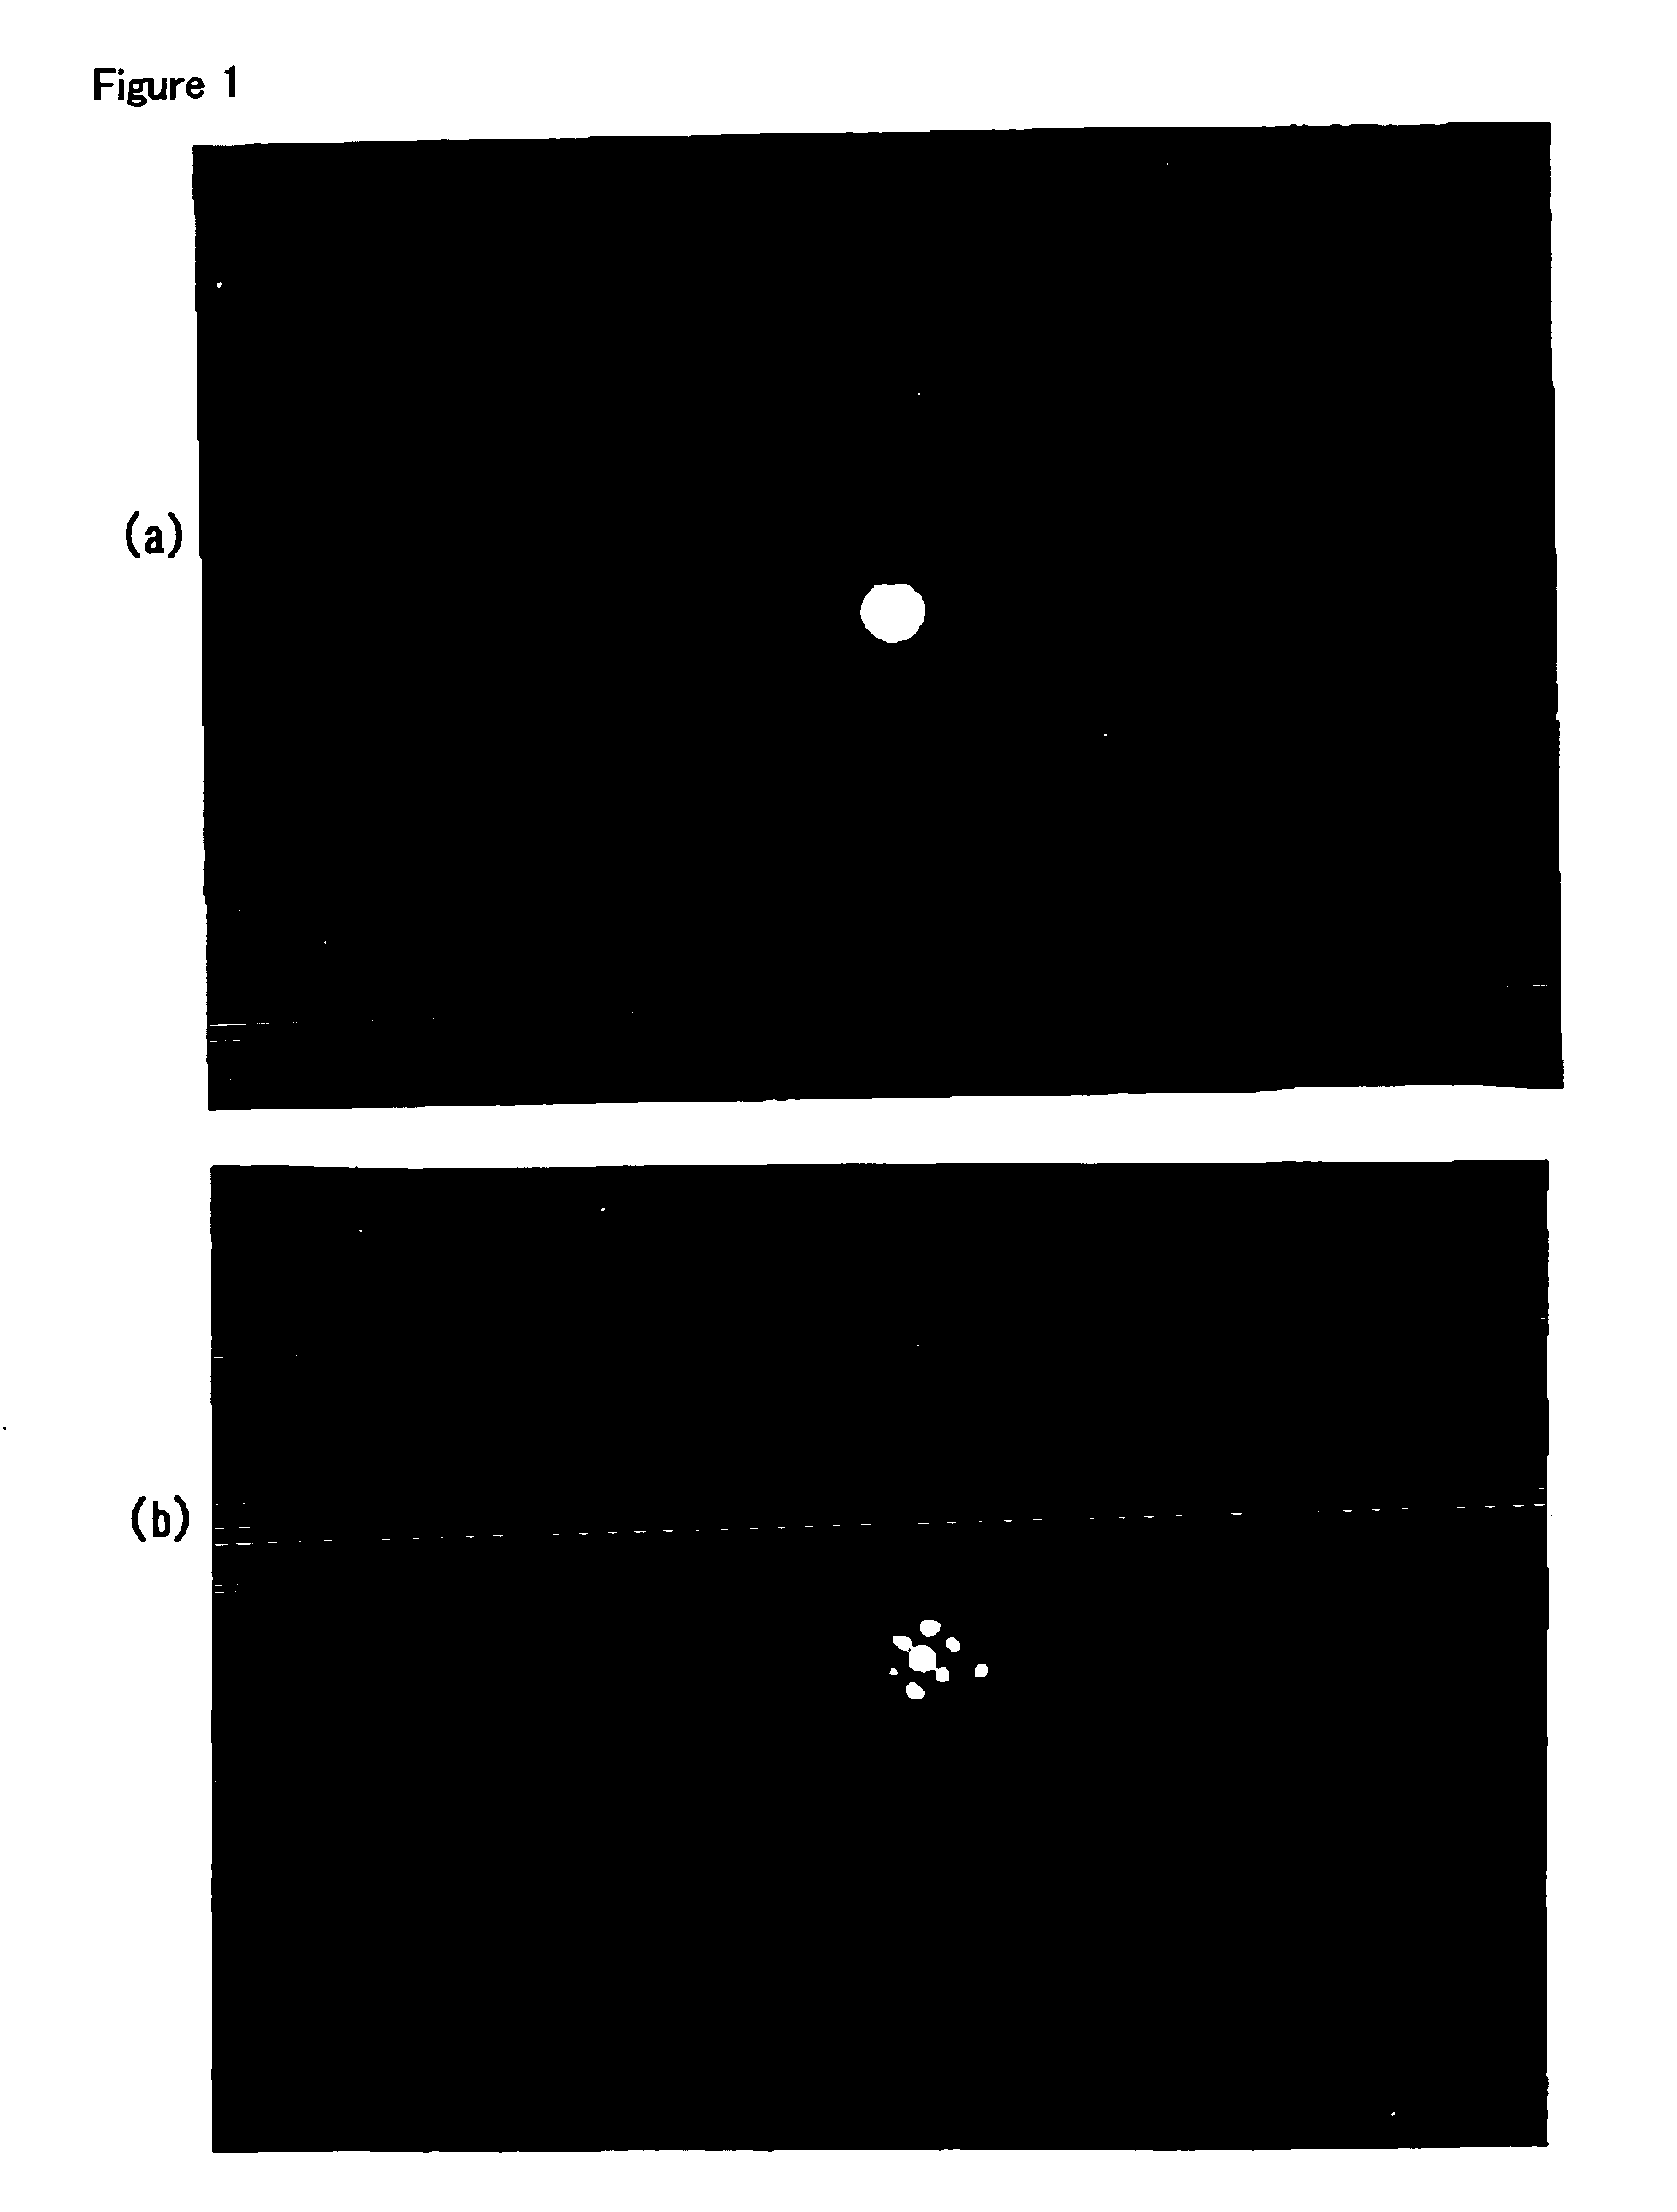 Member having photocatalytic function and method for manufacture thereof